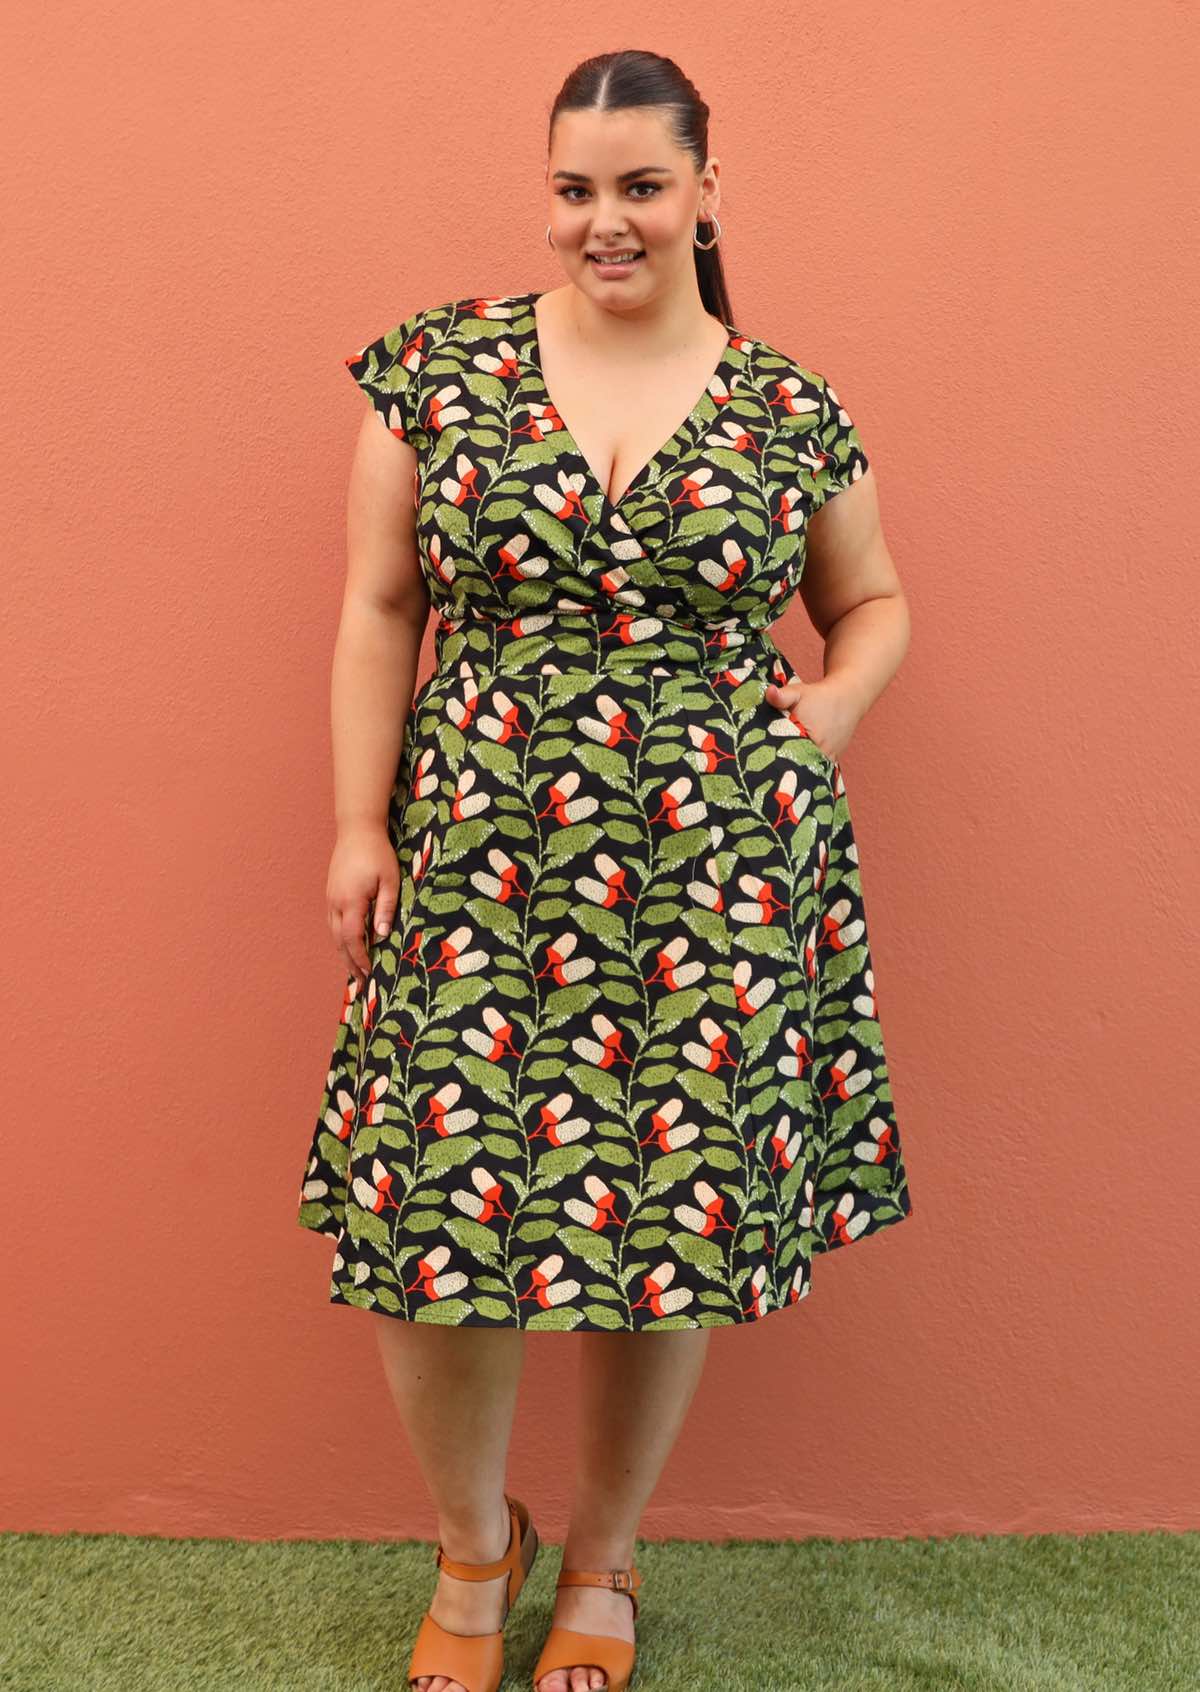 Plus size model wearing retro style cotton dress in black and green 